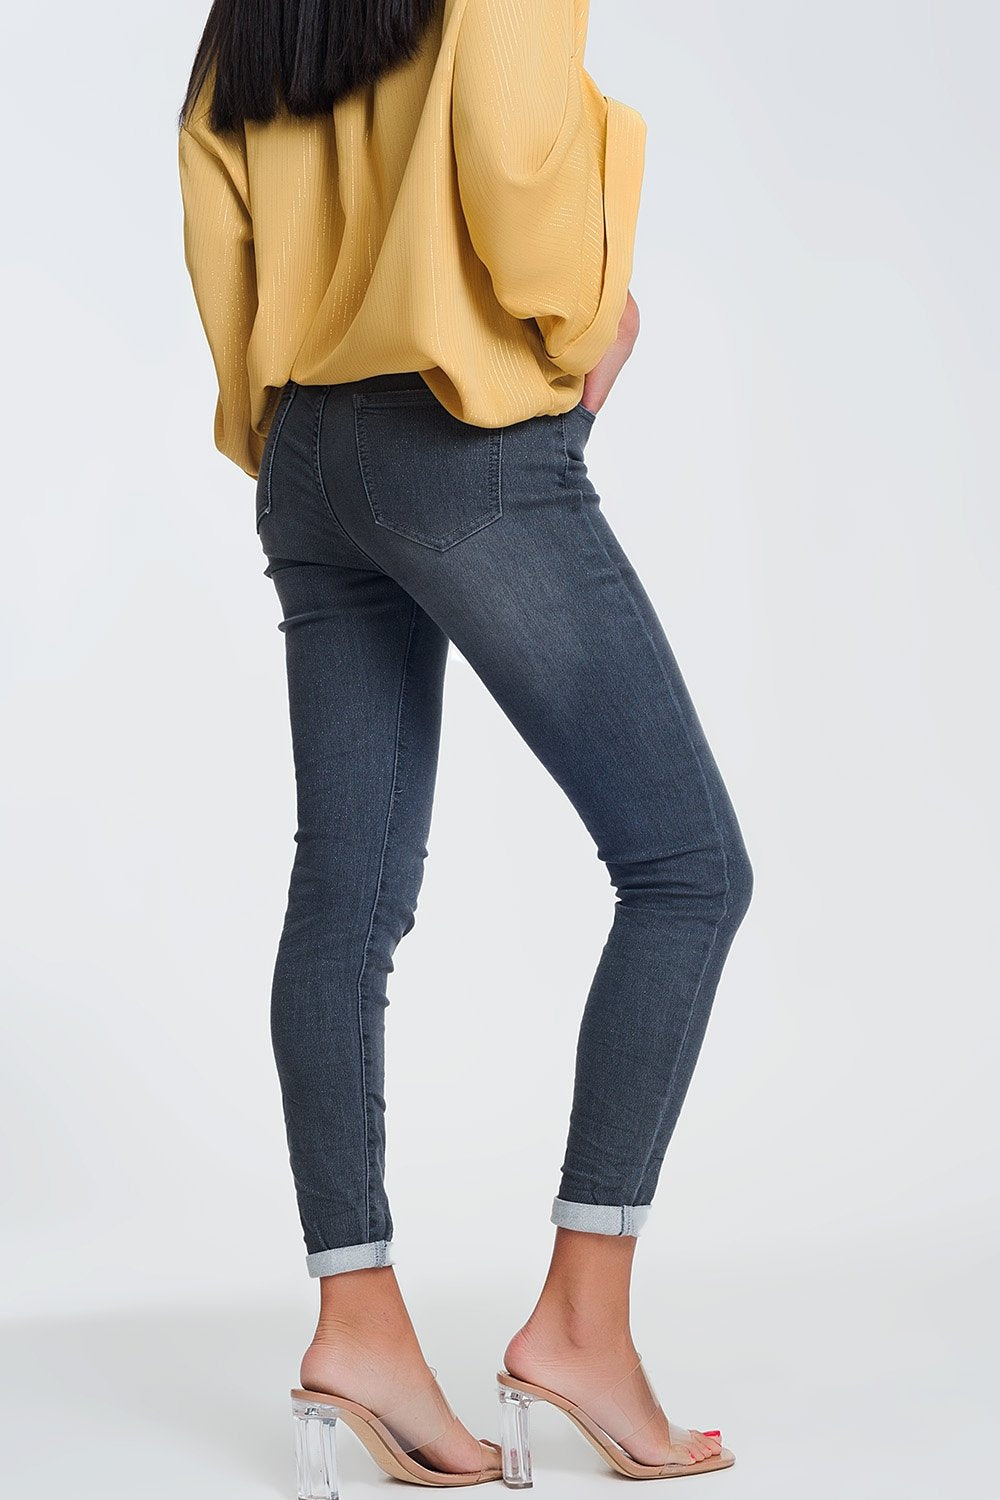 High Waisted Denim Jeans in Glitter Fabric - LOLA LUXE